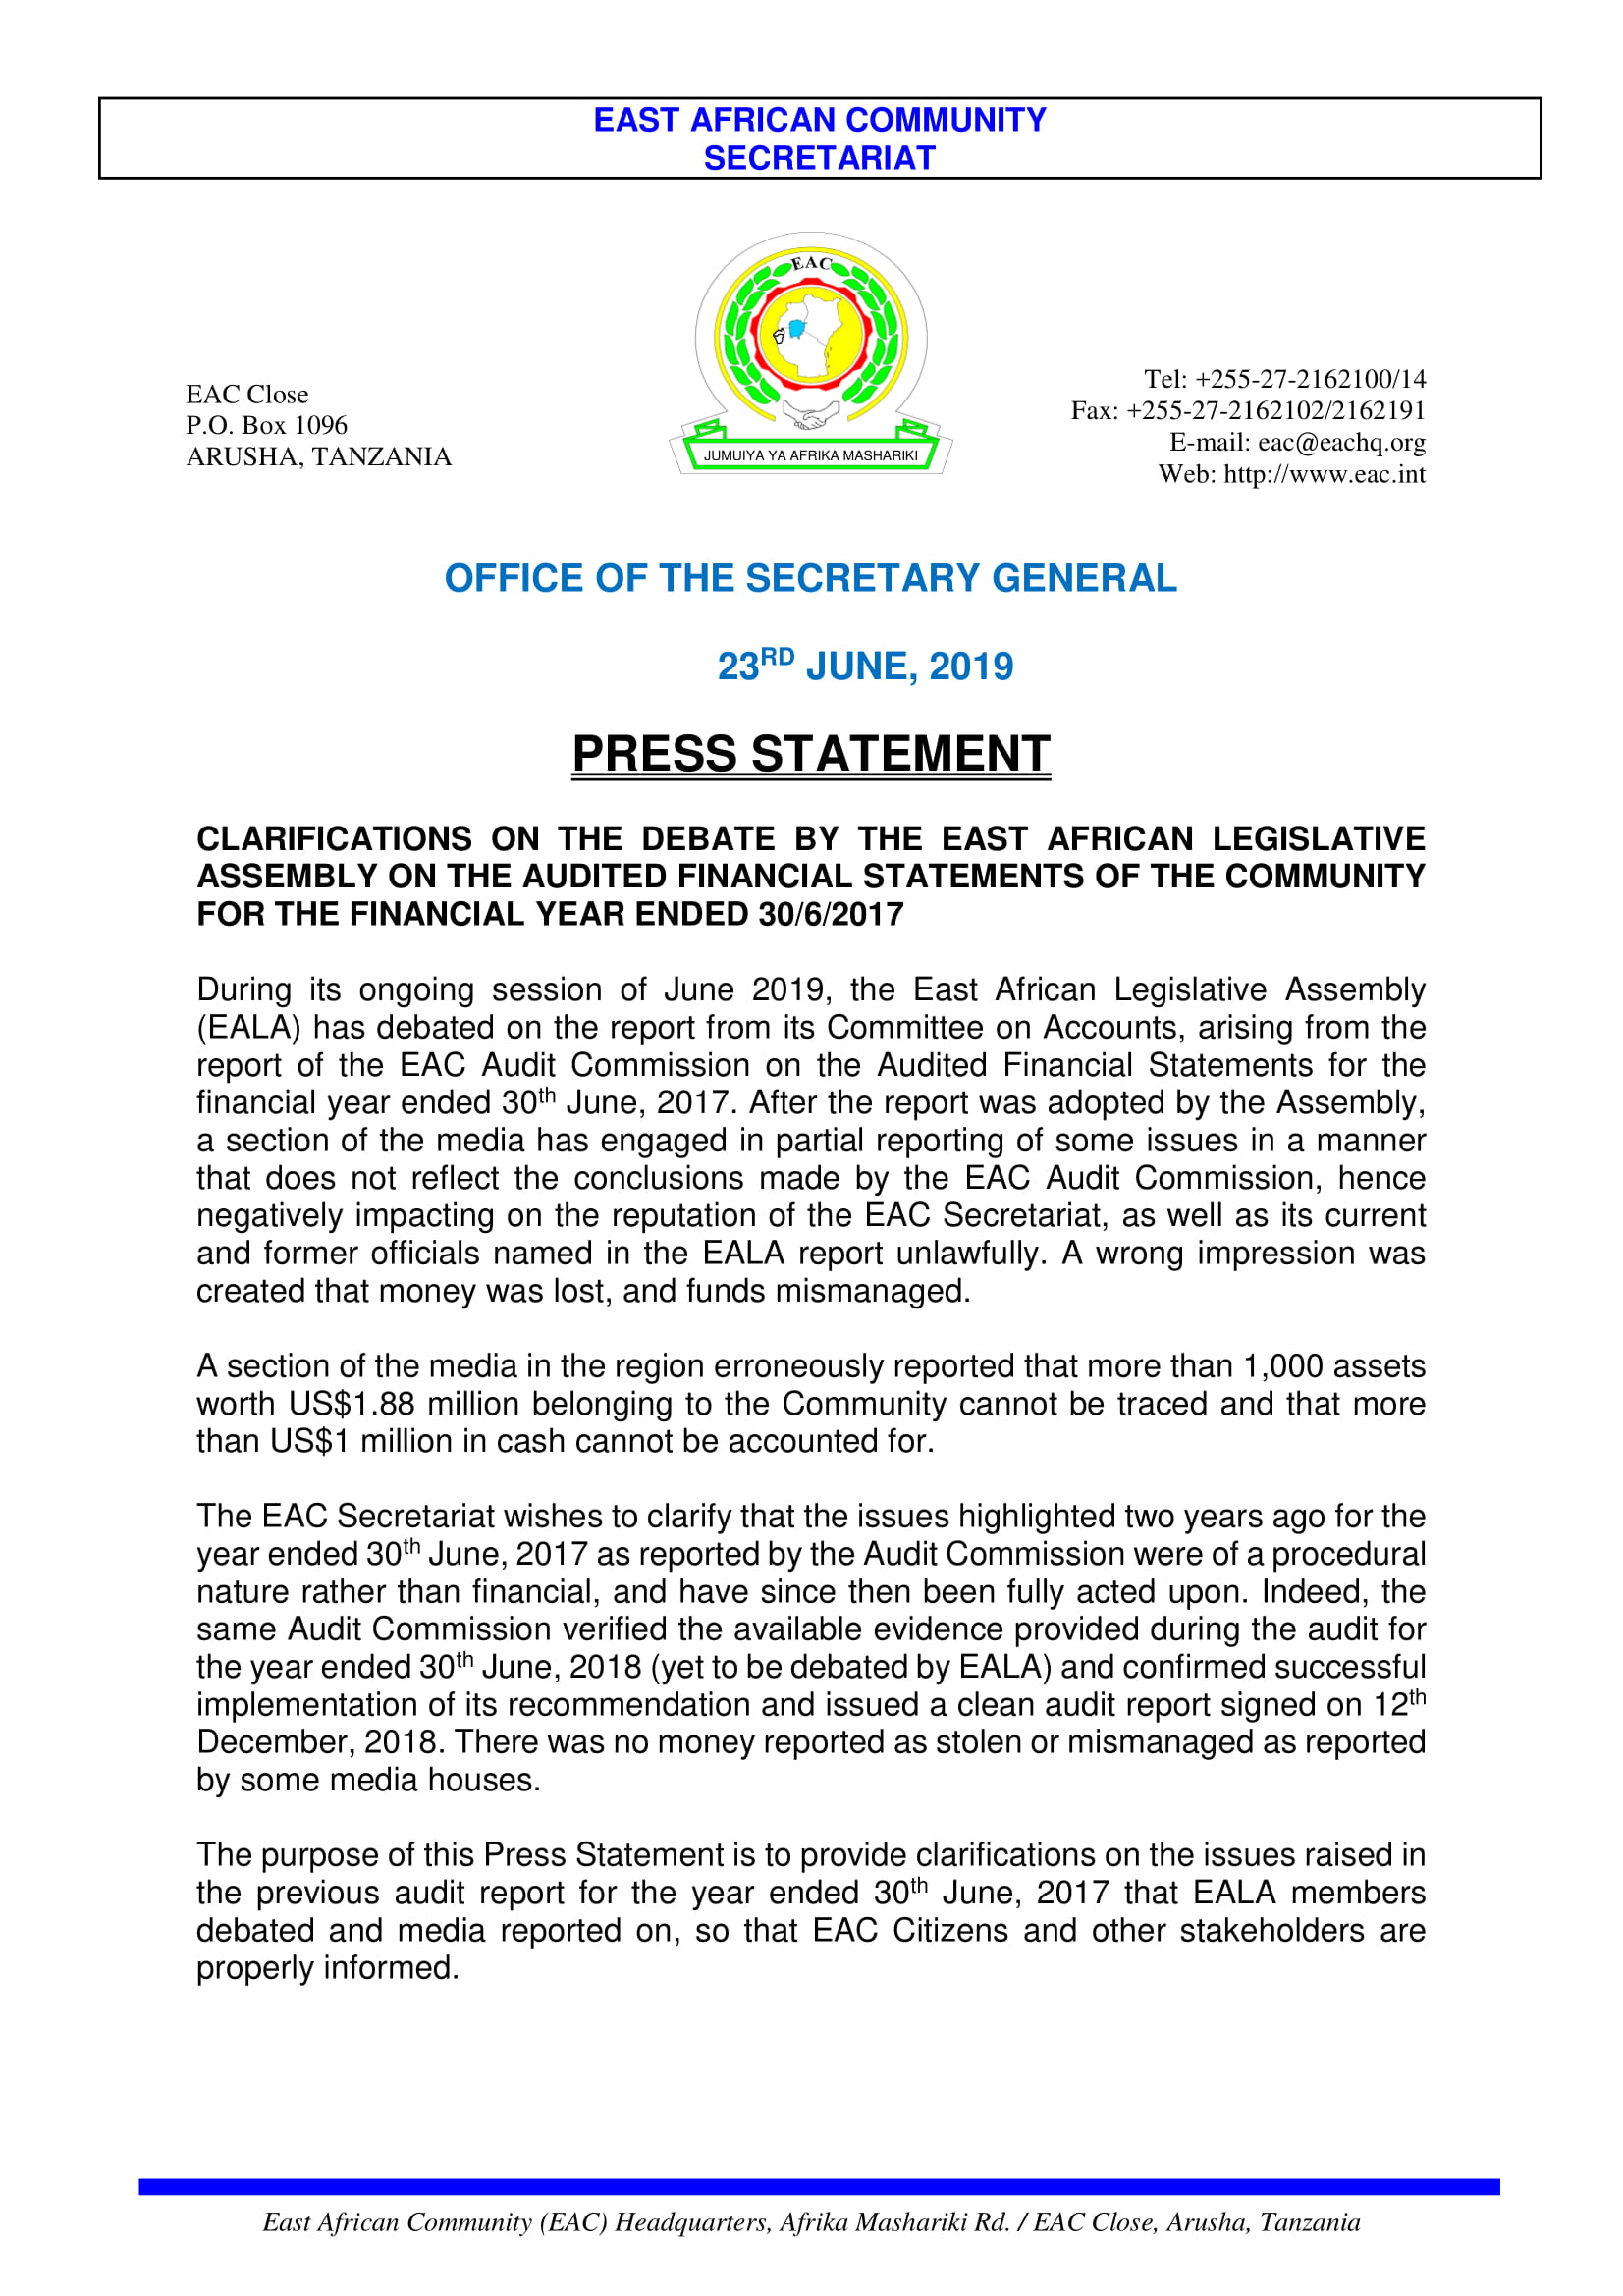 PRESS STATEMENT CLARIFICATION BY THE EAC SECRETARIAT OF AUDIT ISSUES AS DEBATED BY EALA IN JUNE 2019 1